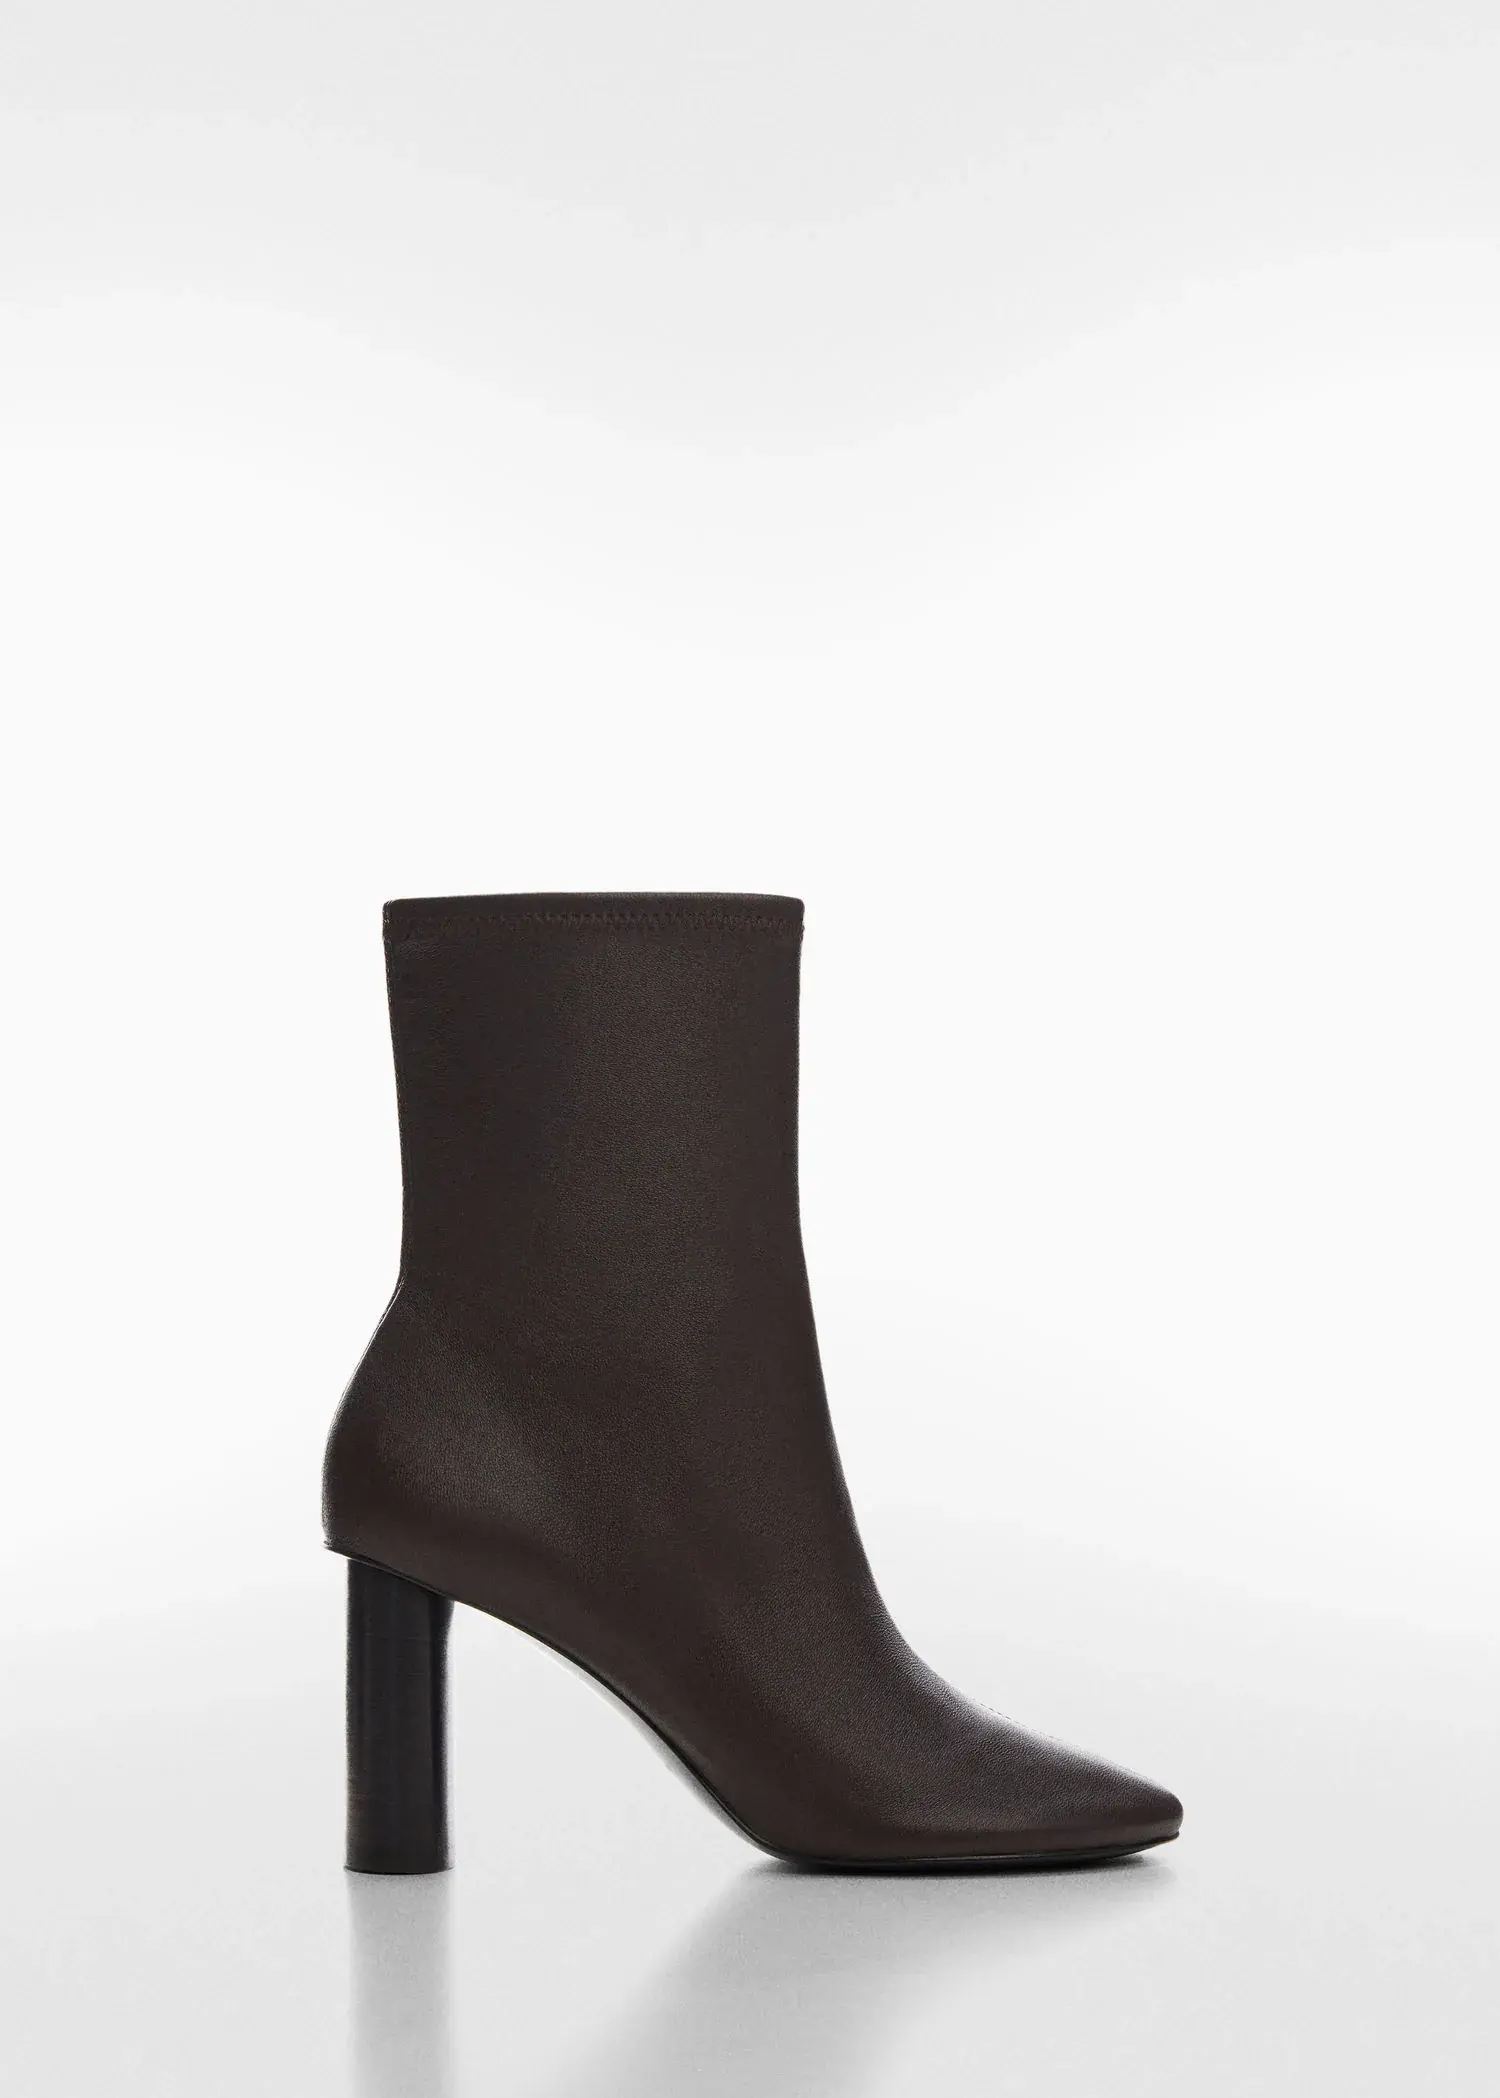 Mango Rounded toe leather ankle boots. 1